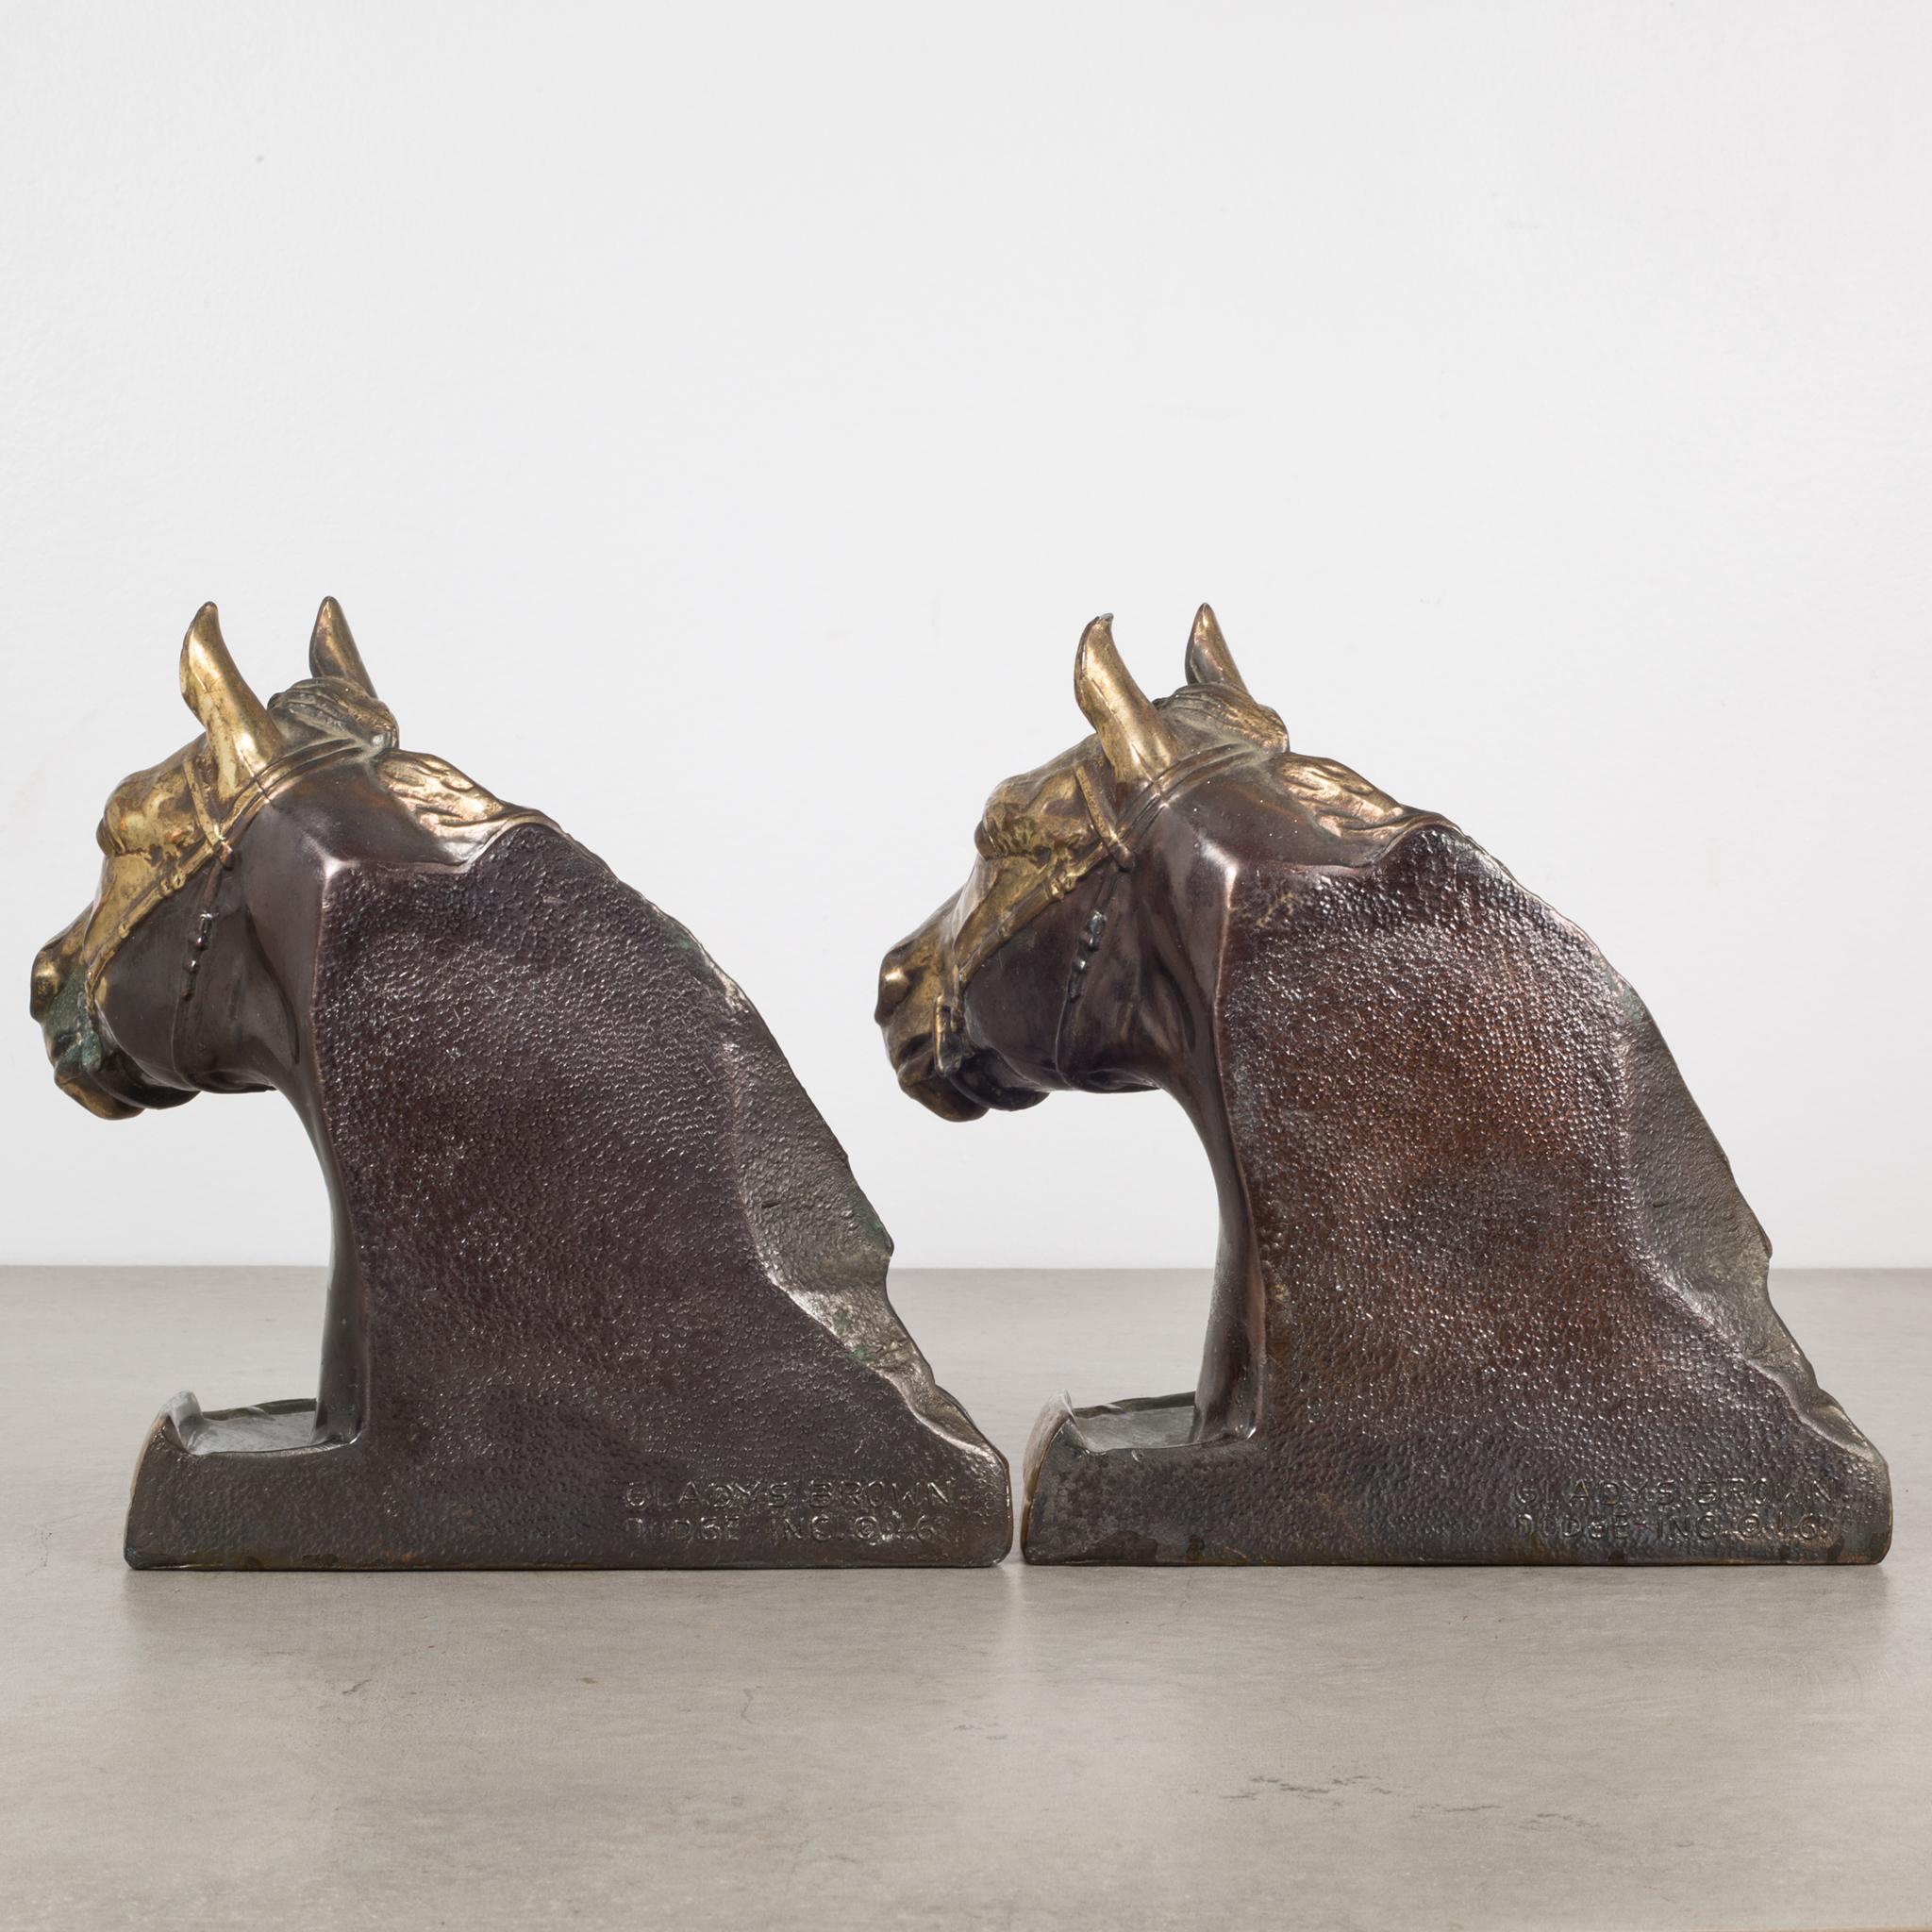 American Bronze-Plated Horse Head Bookends by Glady's Brown and Dodge, circa 1930